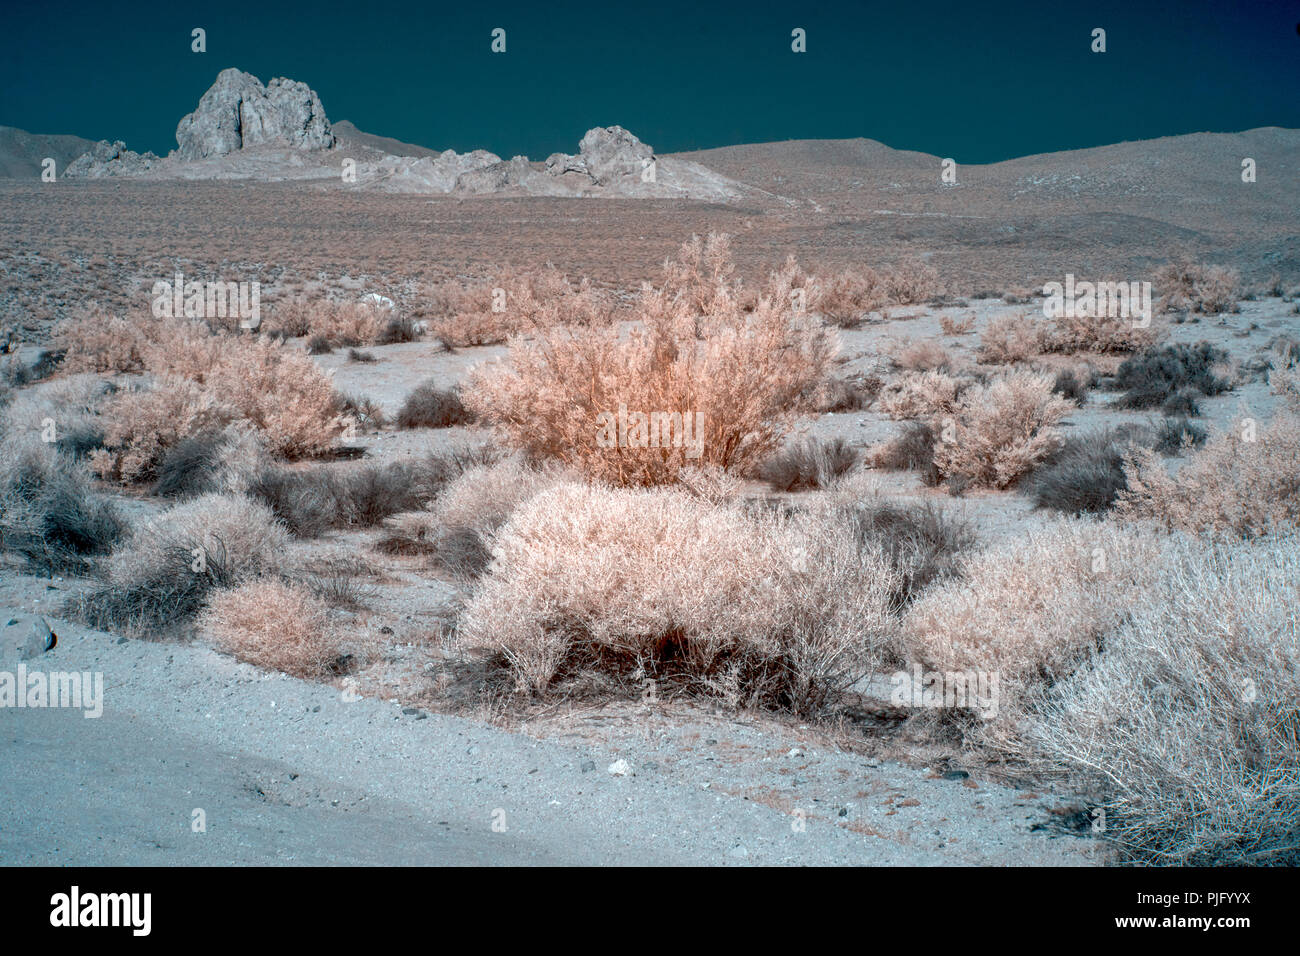 The Mojave Desert in color infrared with large rock formations, desert brush and fields under a blue sky. Stock Photo